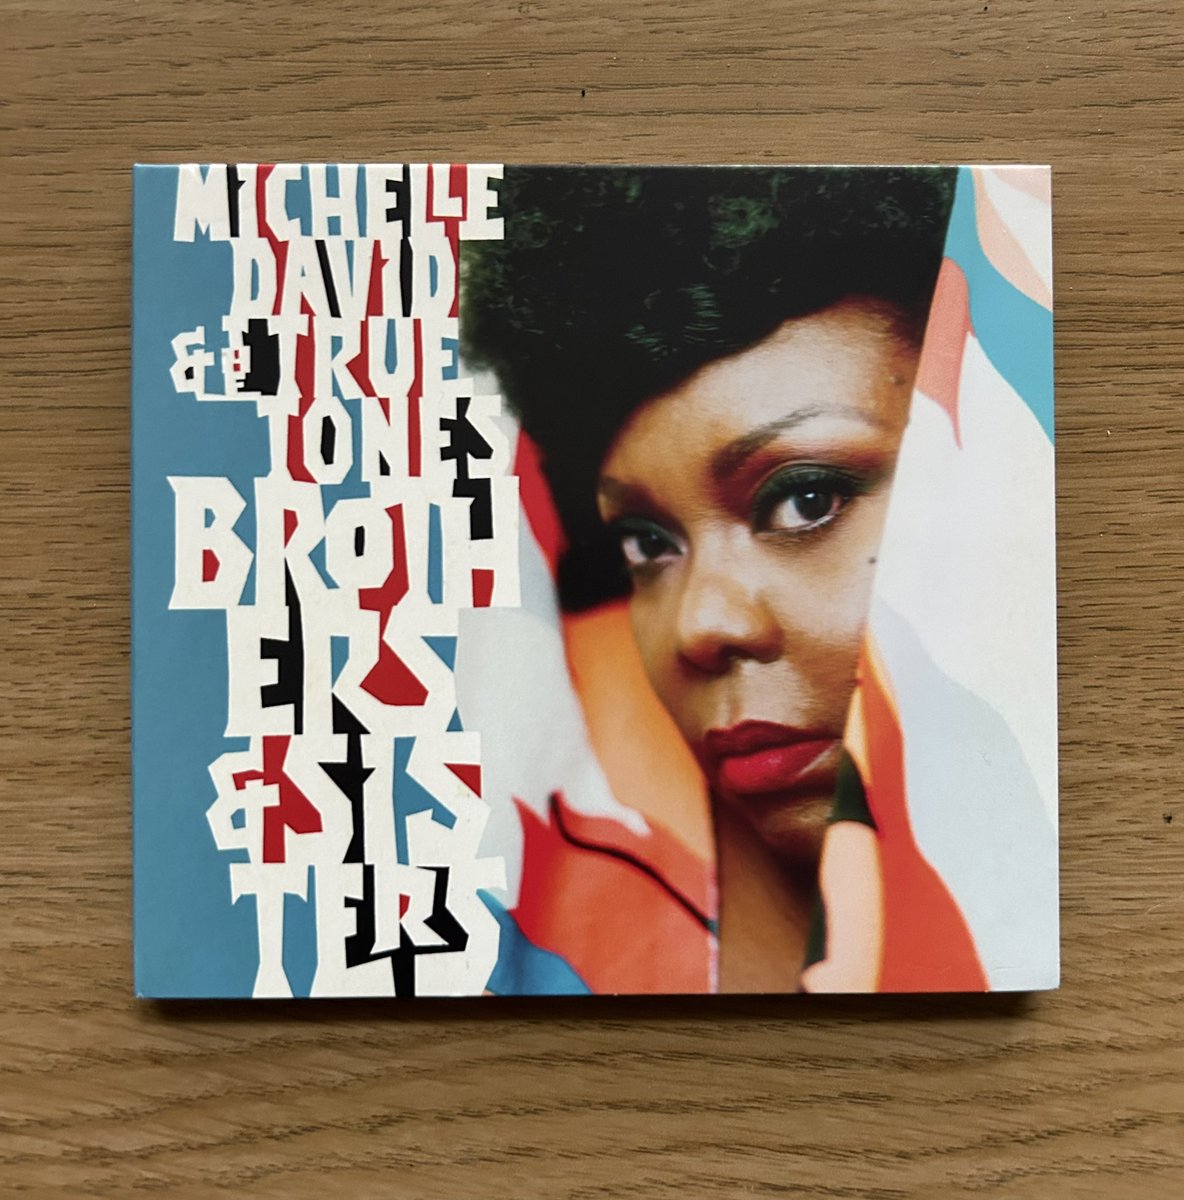 The new Michelle David & The True-tones LP on @RecordKicks is astonishing. Testifying but tender, spirited but soulful. Take a pinch of prime Tina Turner, mix in some positive Mavis vibes & inject a little of Sharon Jones’ joyous energy & this happens 😍 youtu.be/CktdKWRbHvY?si…